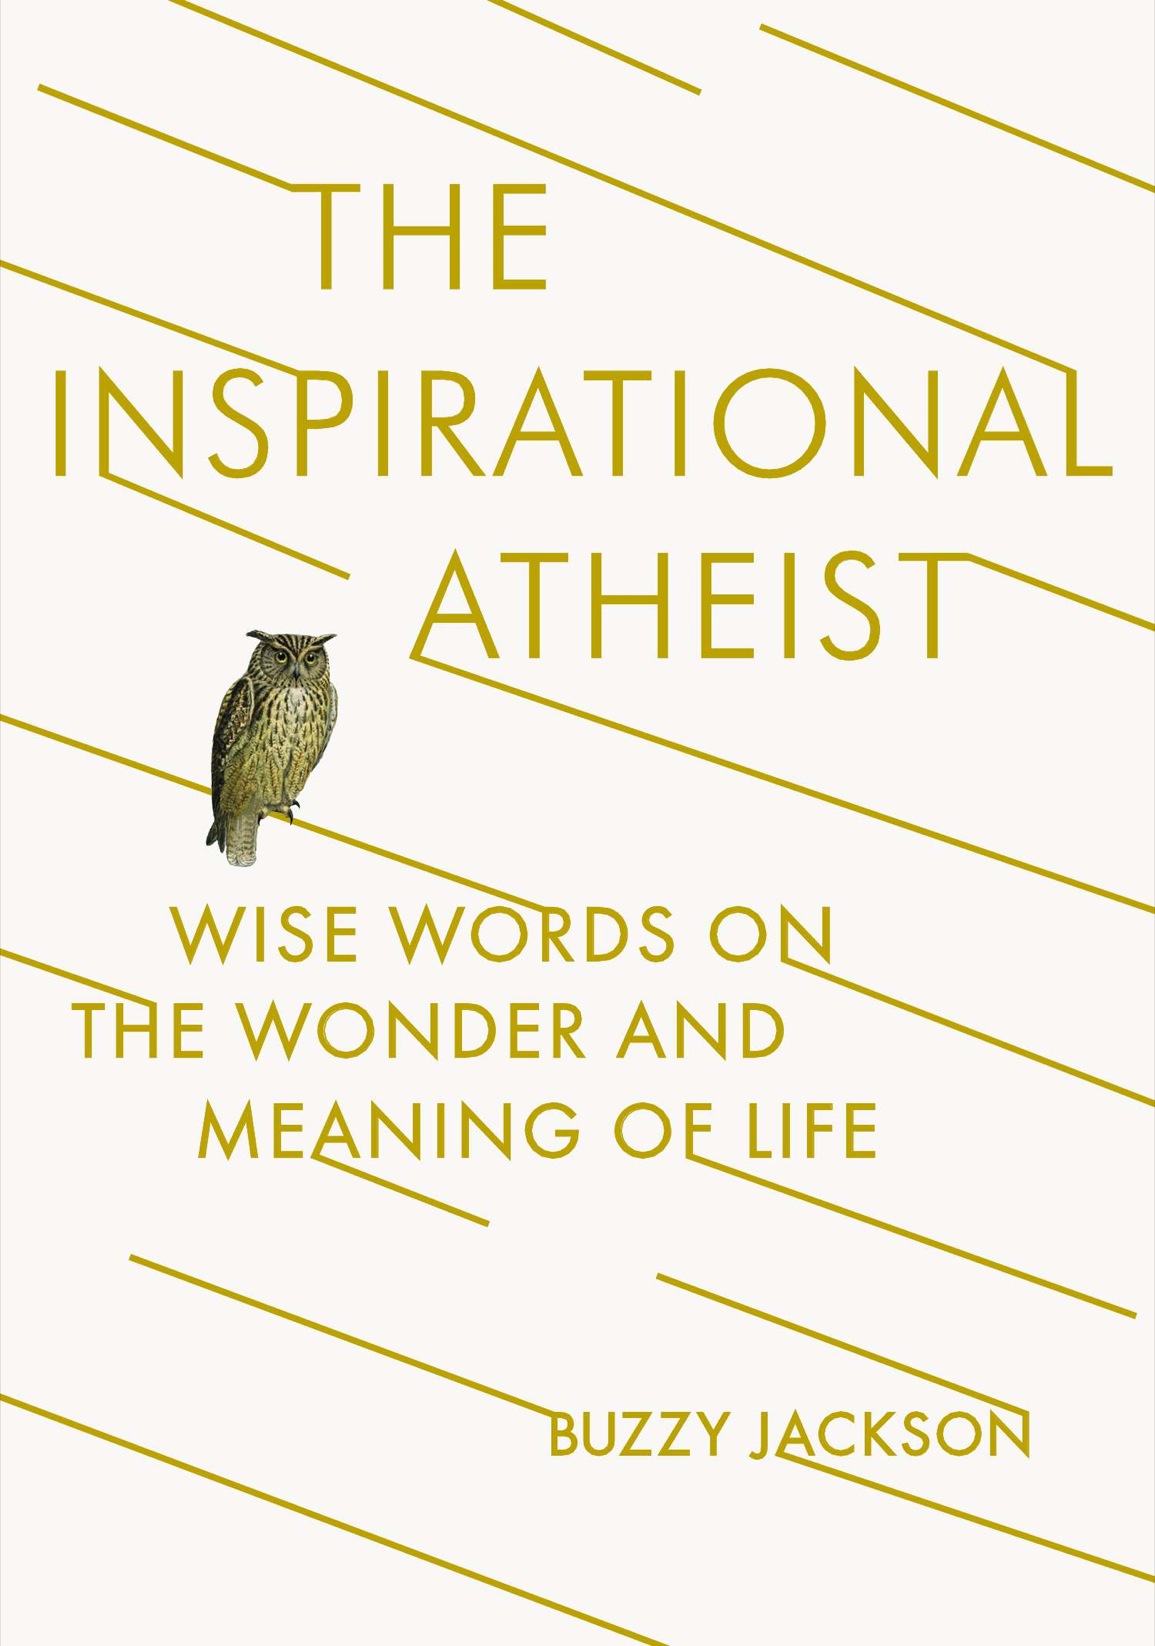 A PLUME BOOK THE INSPIRATIONAL ATHEIST BUZZY JACKSON is the author of the - photo 1